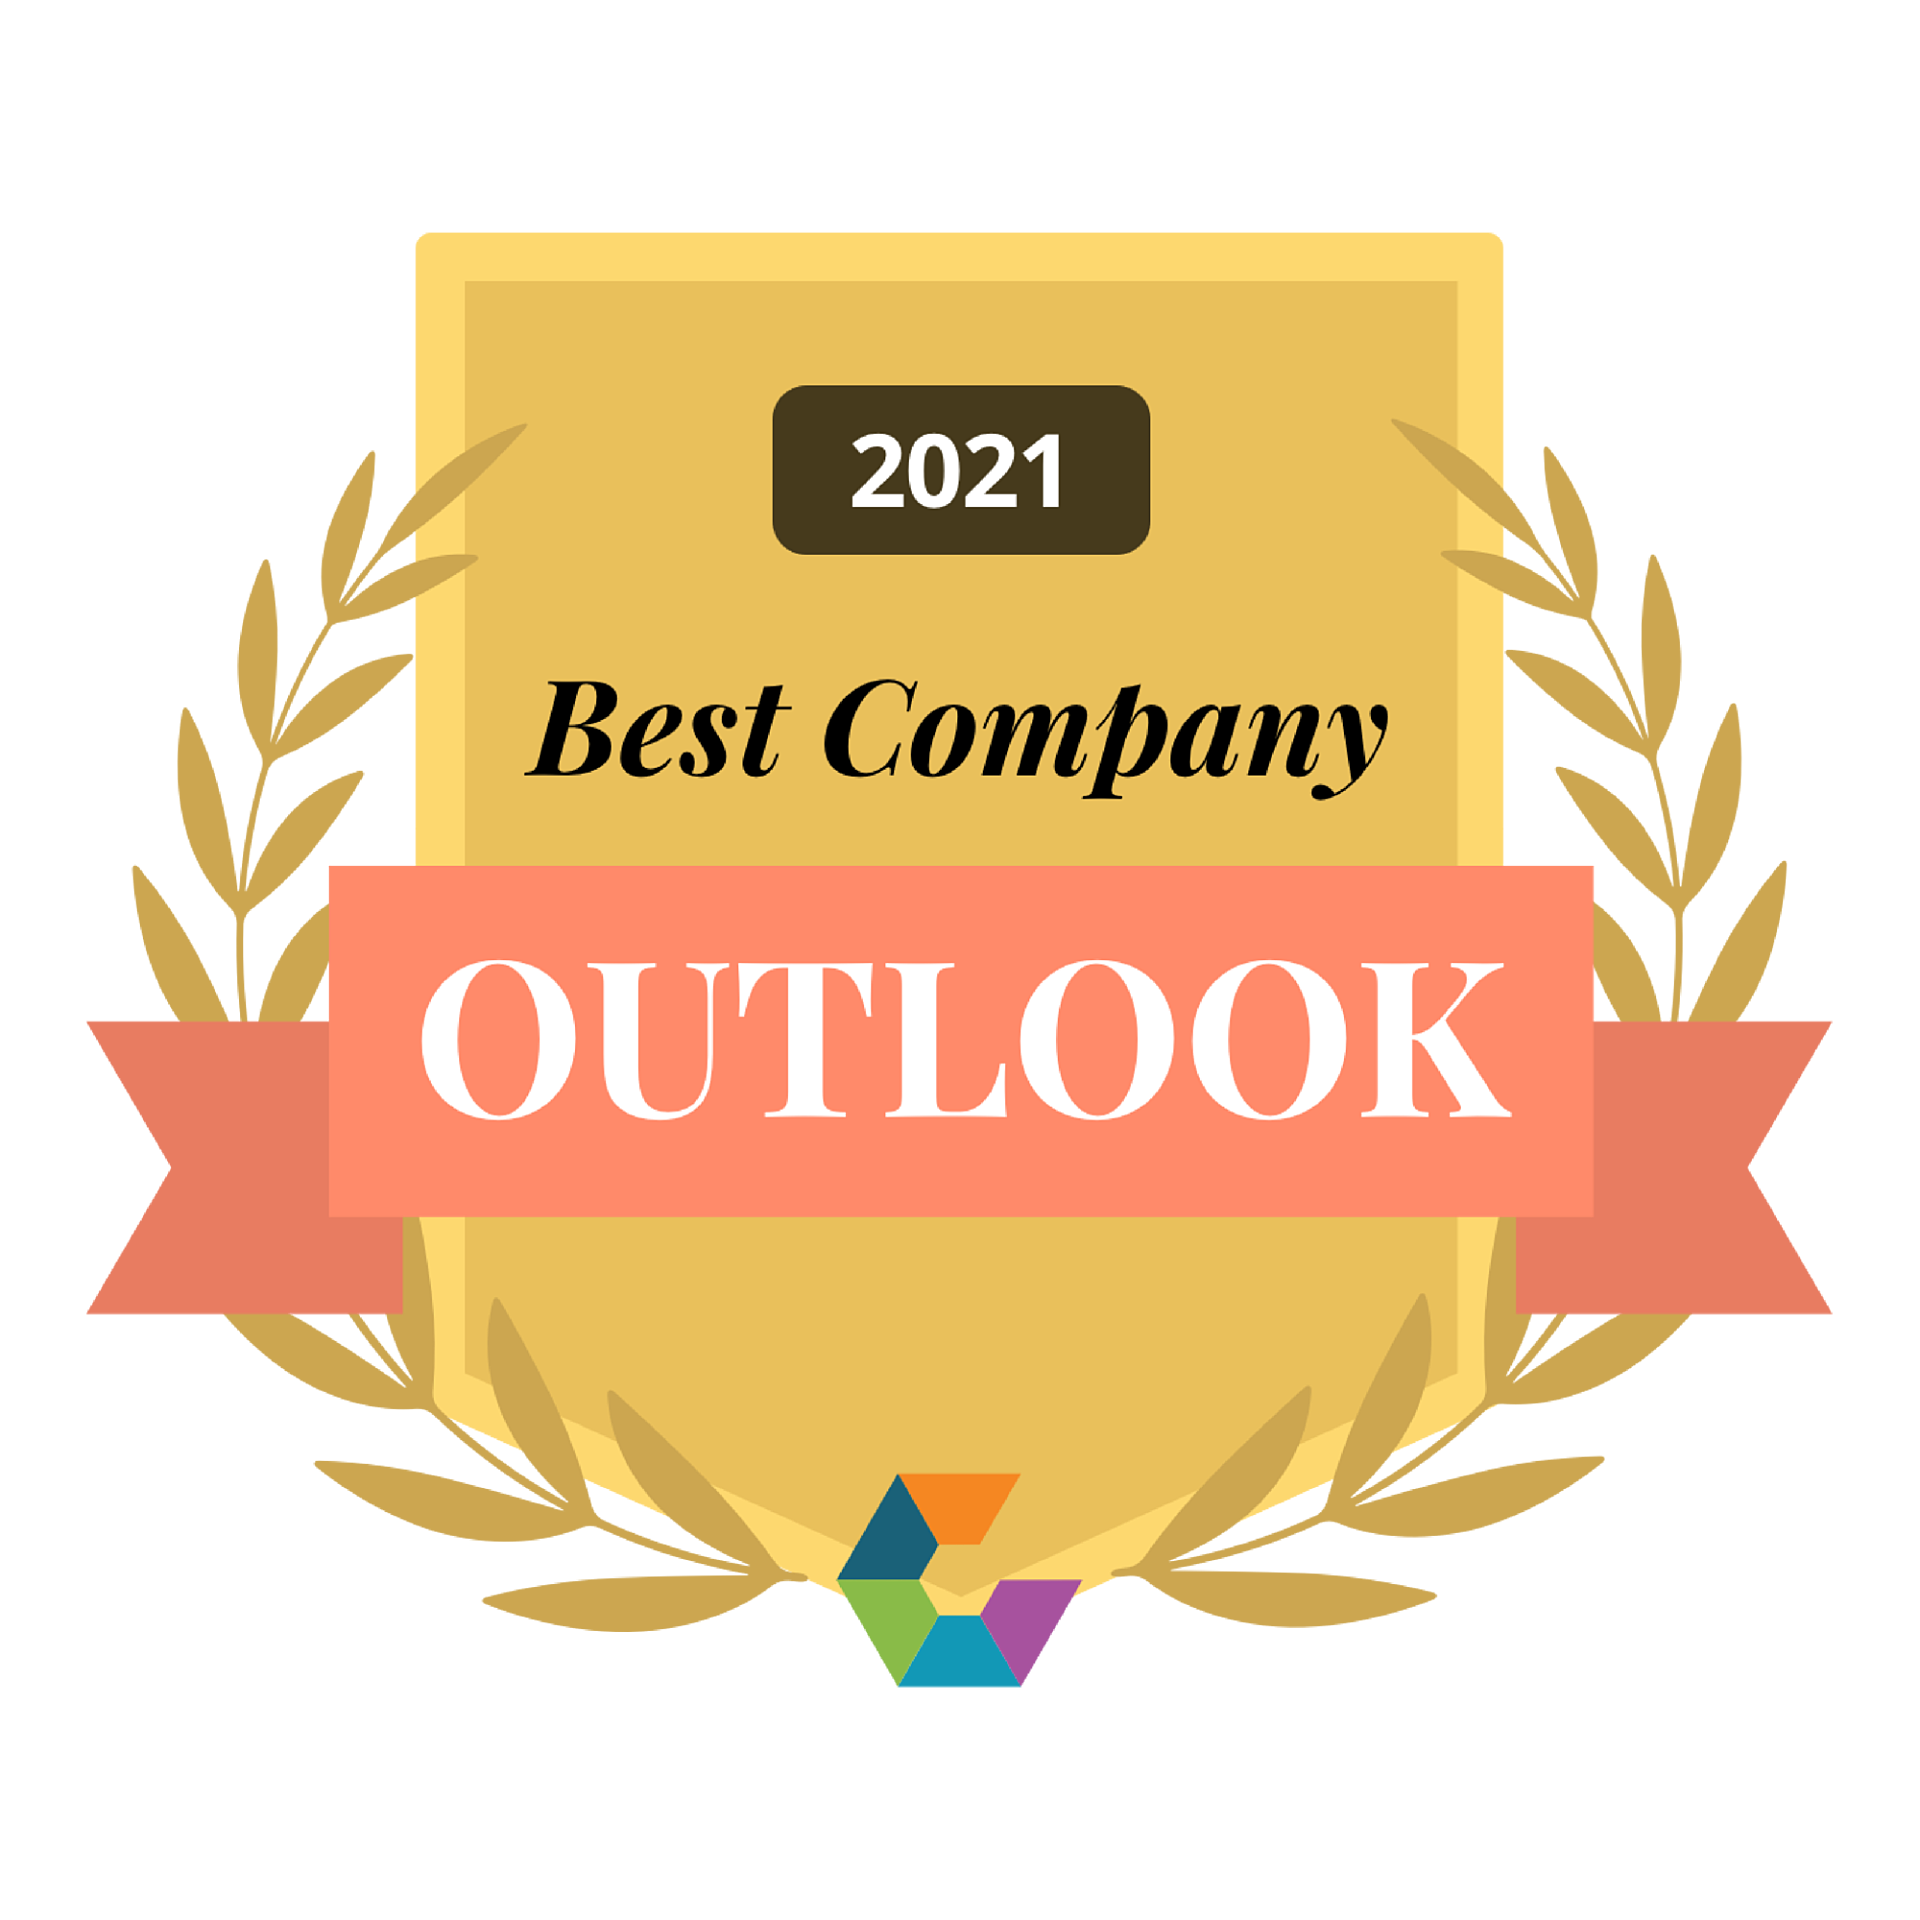 Comparably Award Best Company Outlook